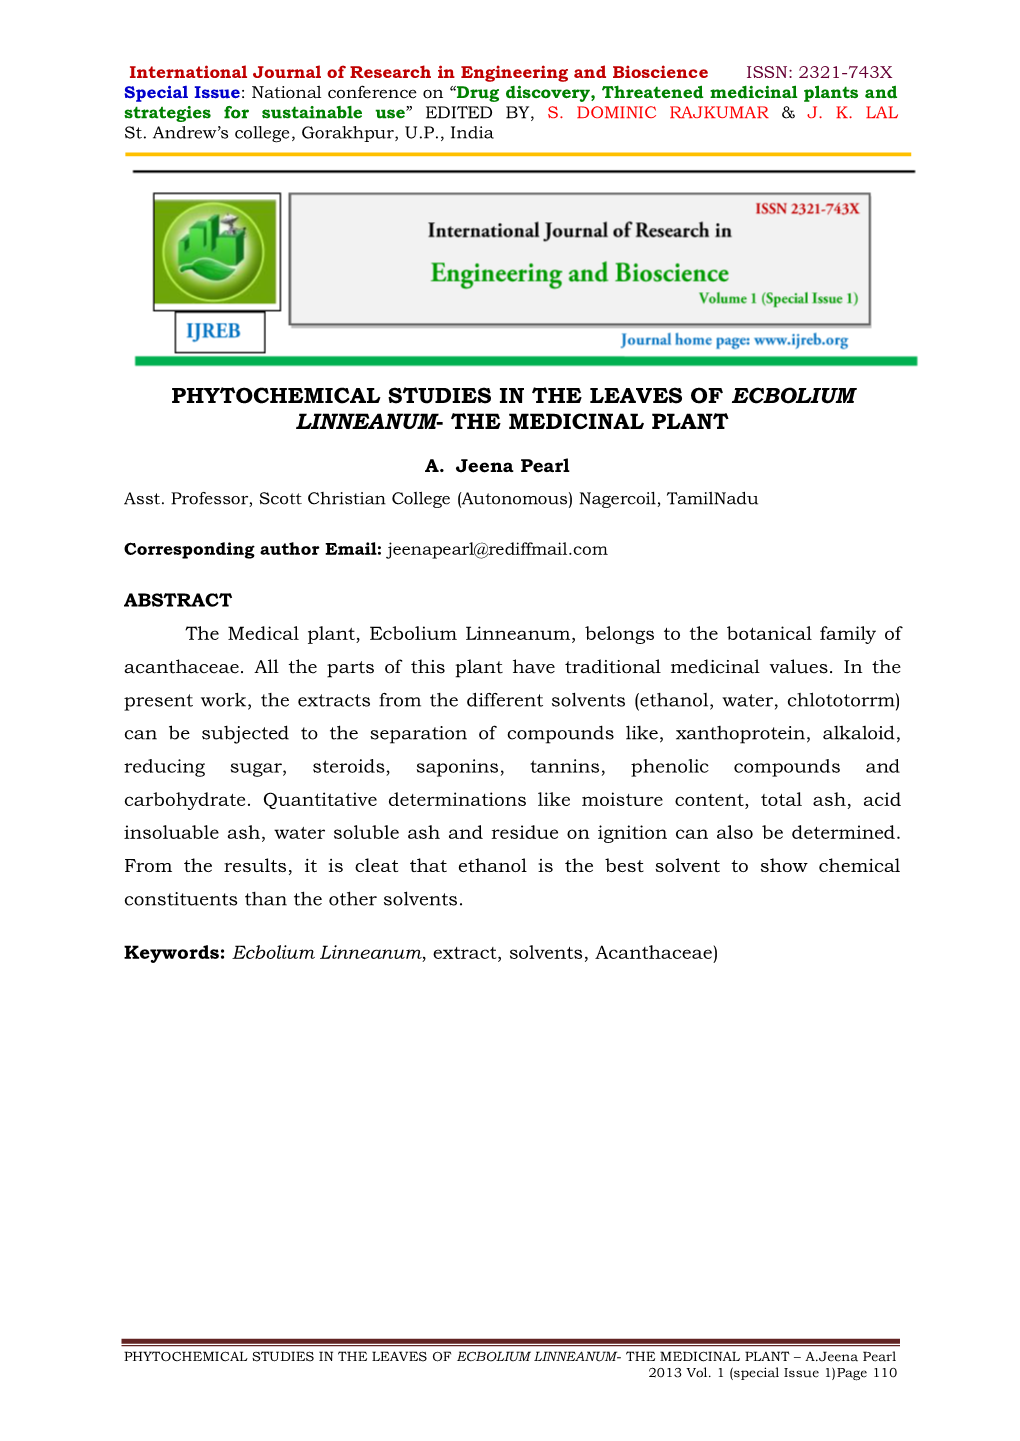 Phytochemical Studies in the Leaves of Ecbolium Linneanum- the Medicinal Plant